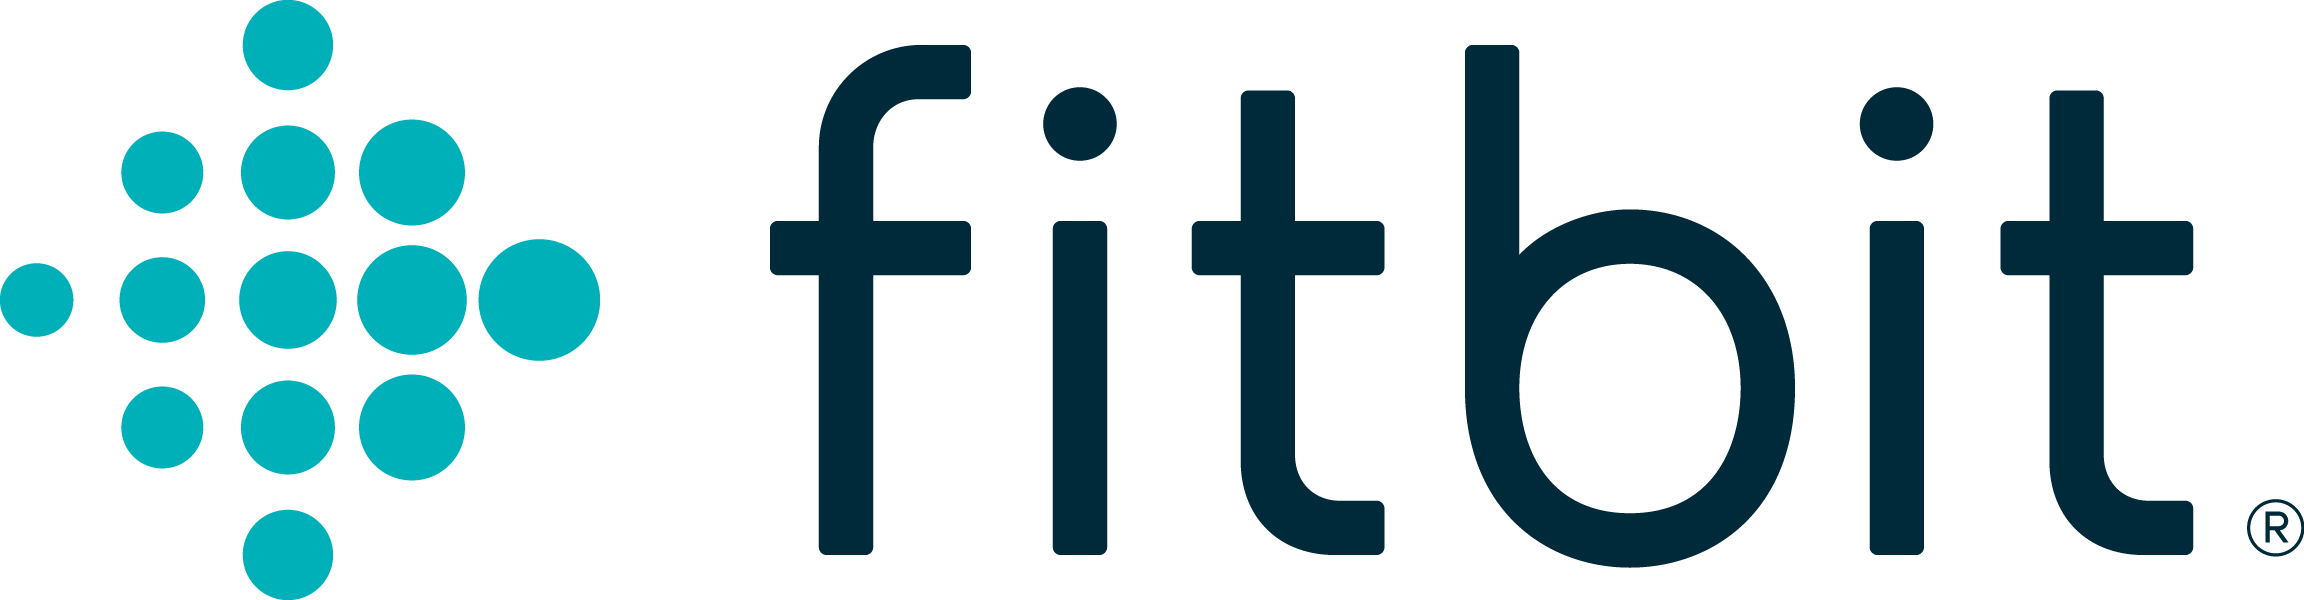 Fitbit are supporting Status Row